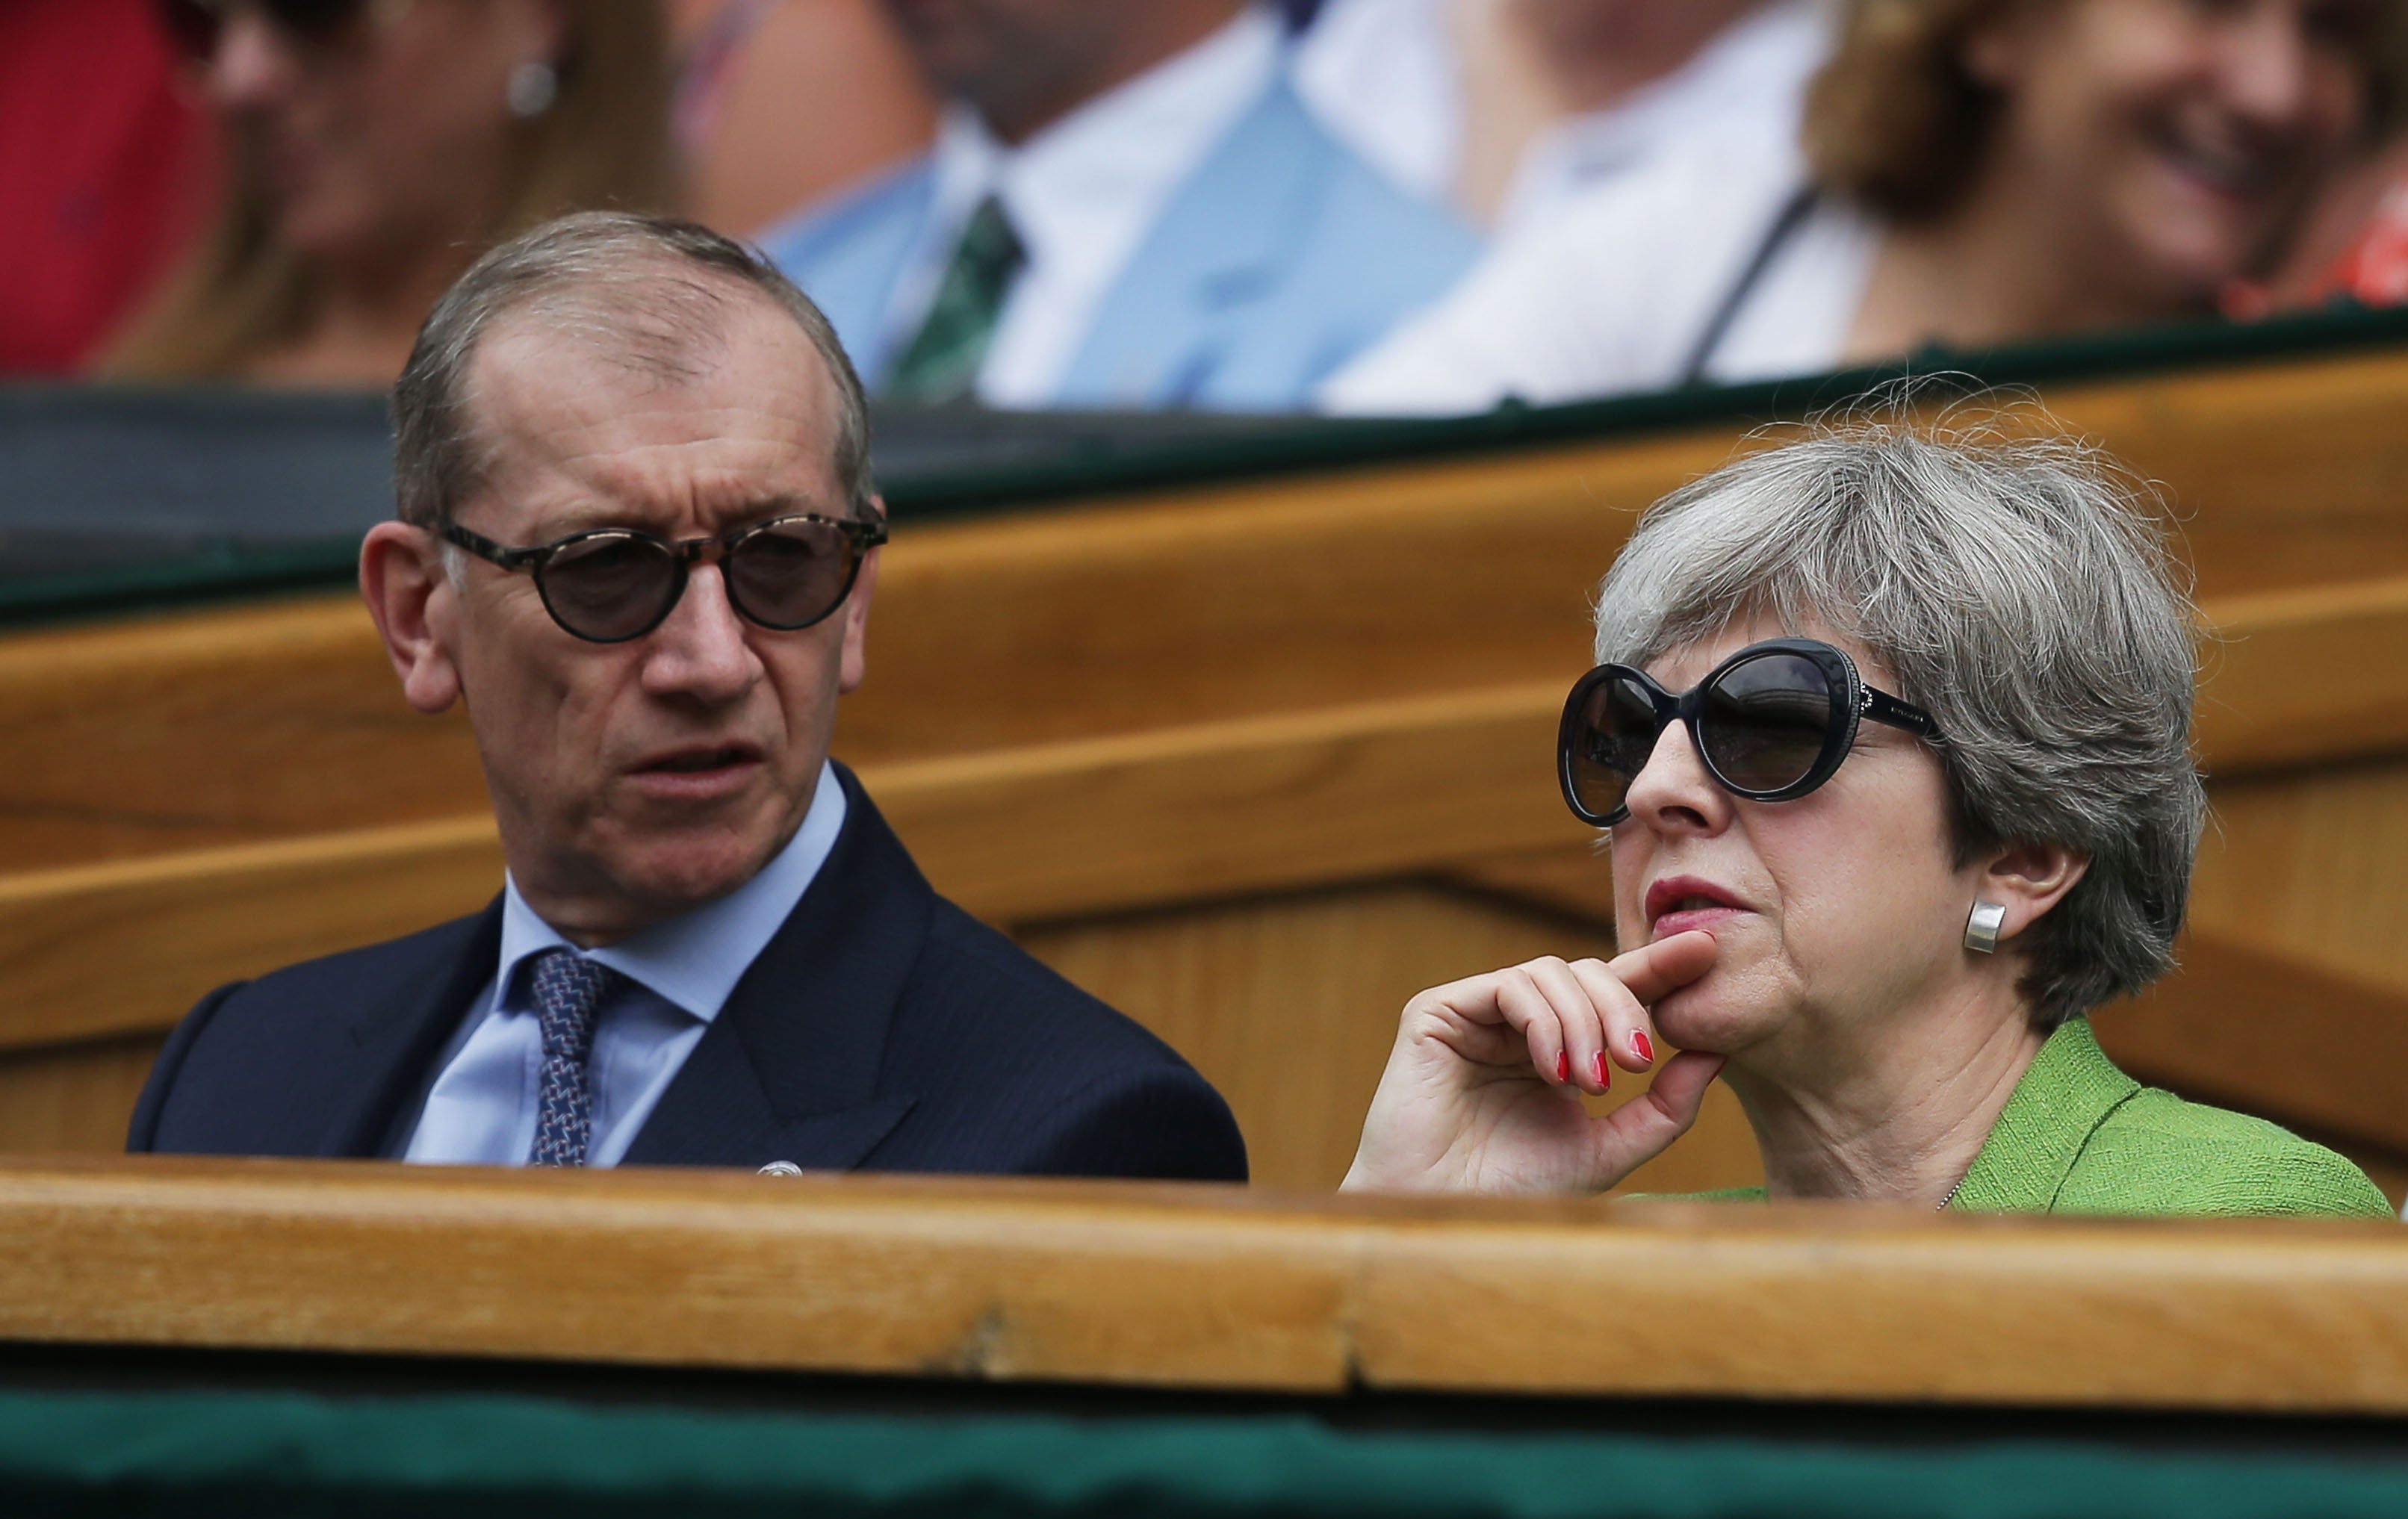 The Mays at Wimbledon in 2017